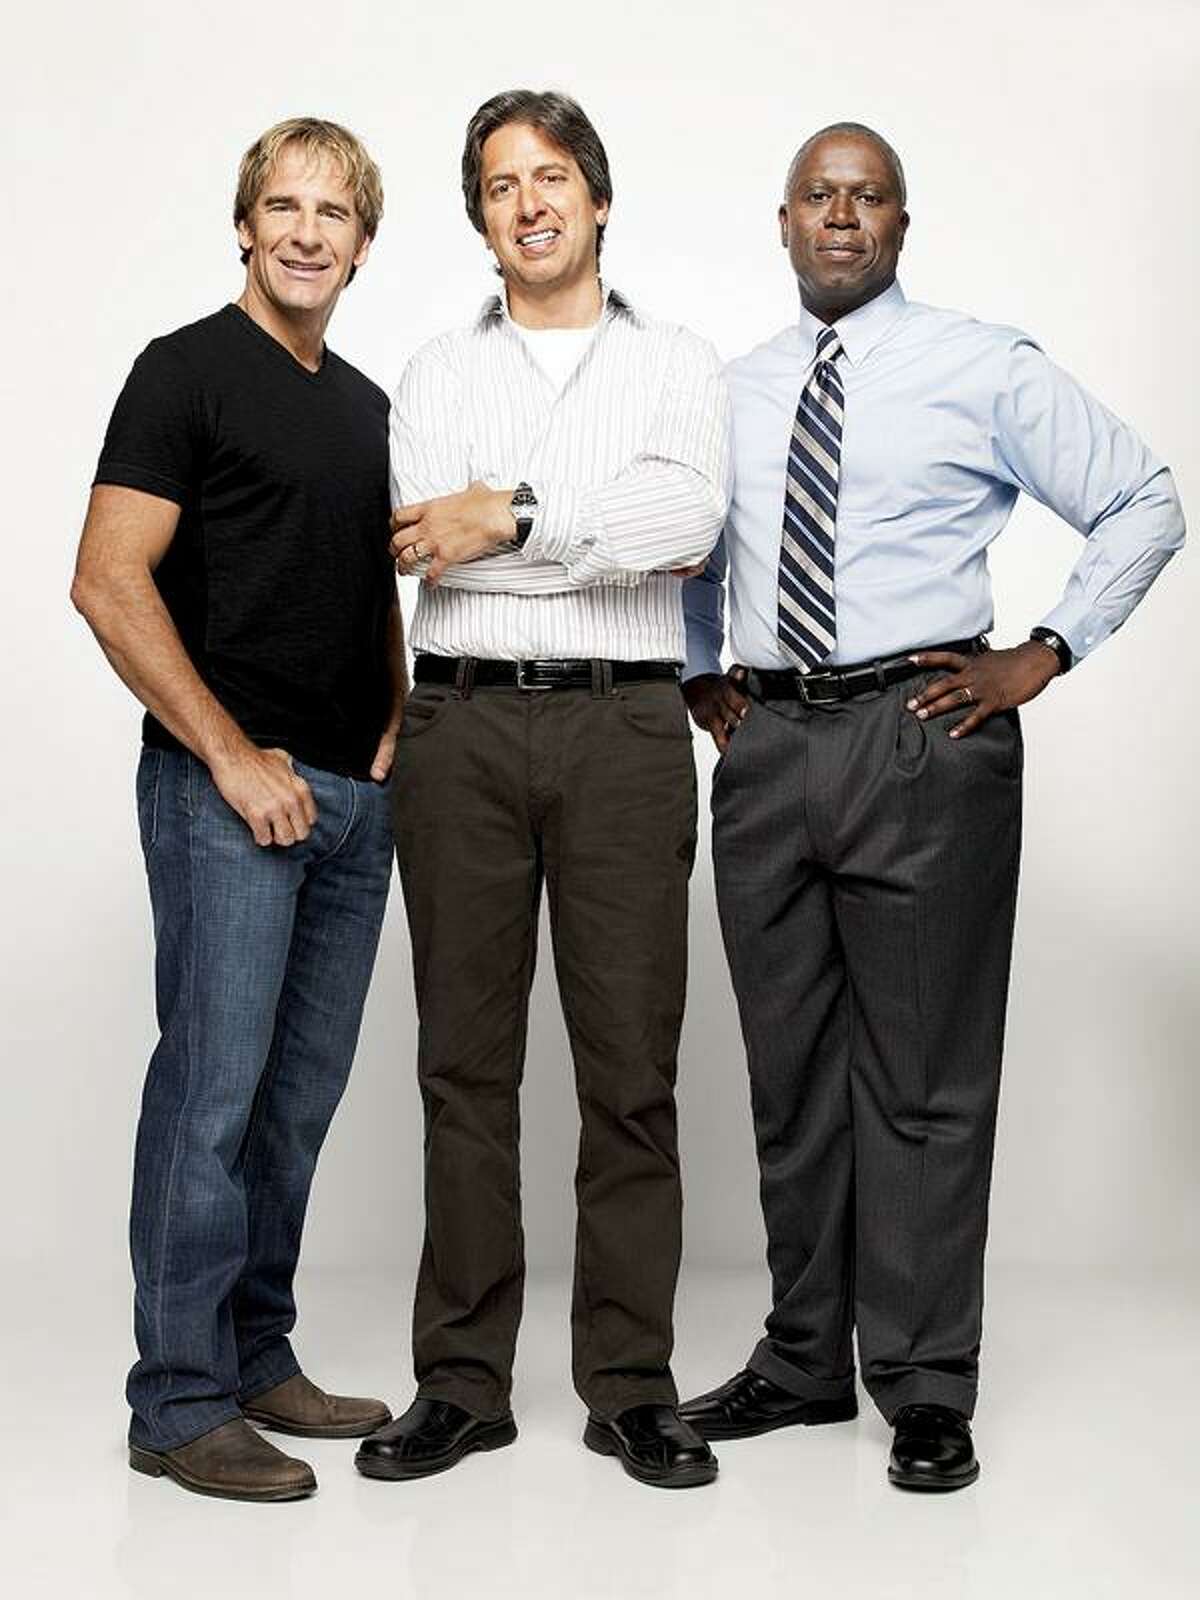 Scott Bakula, left, Ray Romano and Andre Braugher are "Men of a Certain Age."